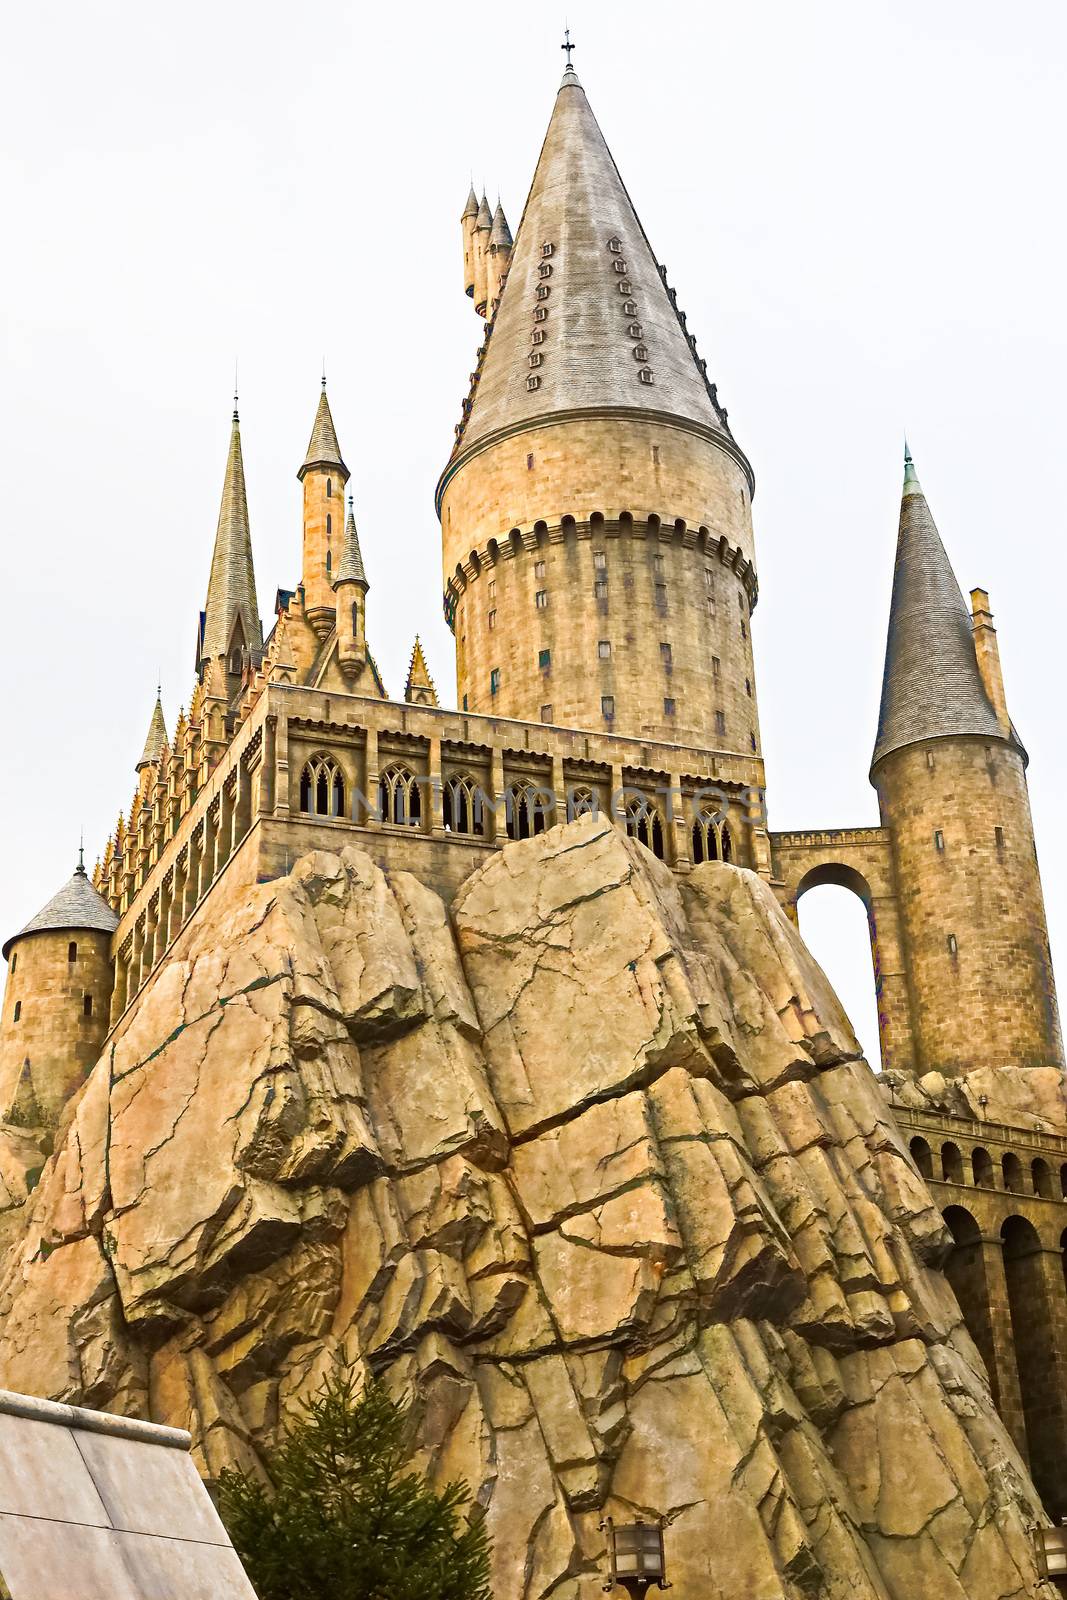 Osaka, Japan - Dec 02, 2017: View of Hogwarts castle at the Wizarding World of Harry Potter in Universal Studios Japan.